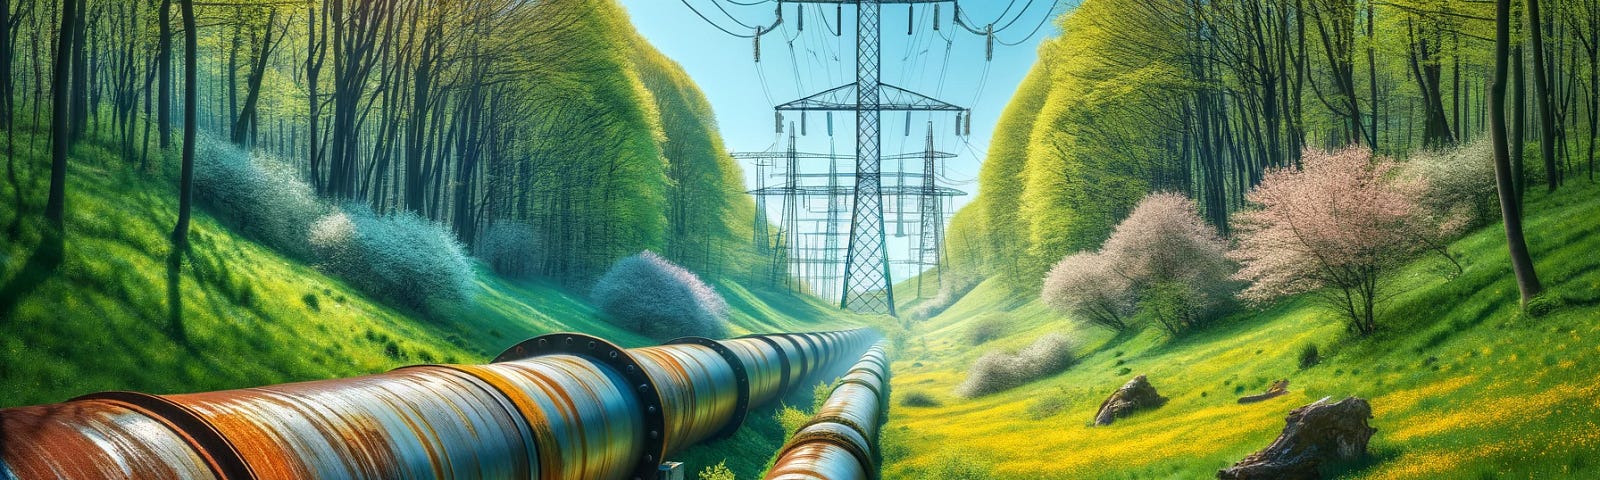 ChatGPT & DALL-E generated panoramic image of a rusting pipeline in a meadow with a humming HVDC transmission line overhead, set in the springtime.